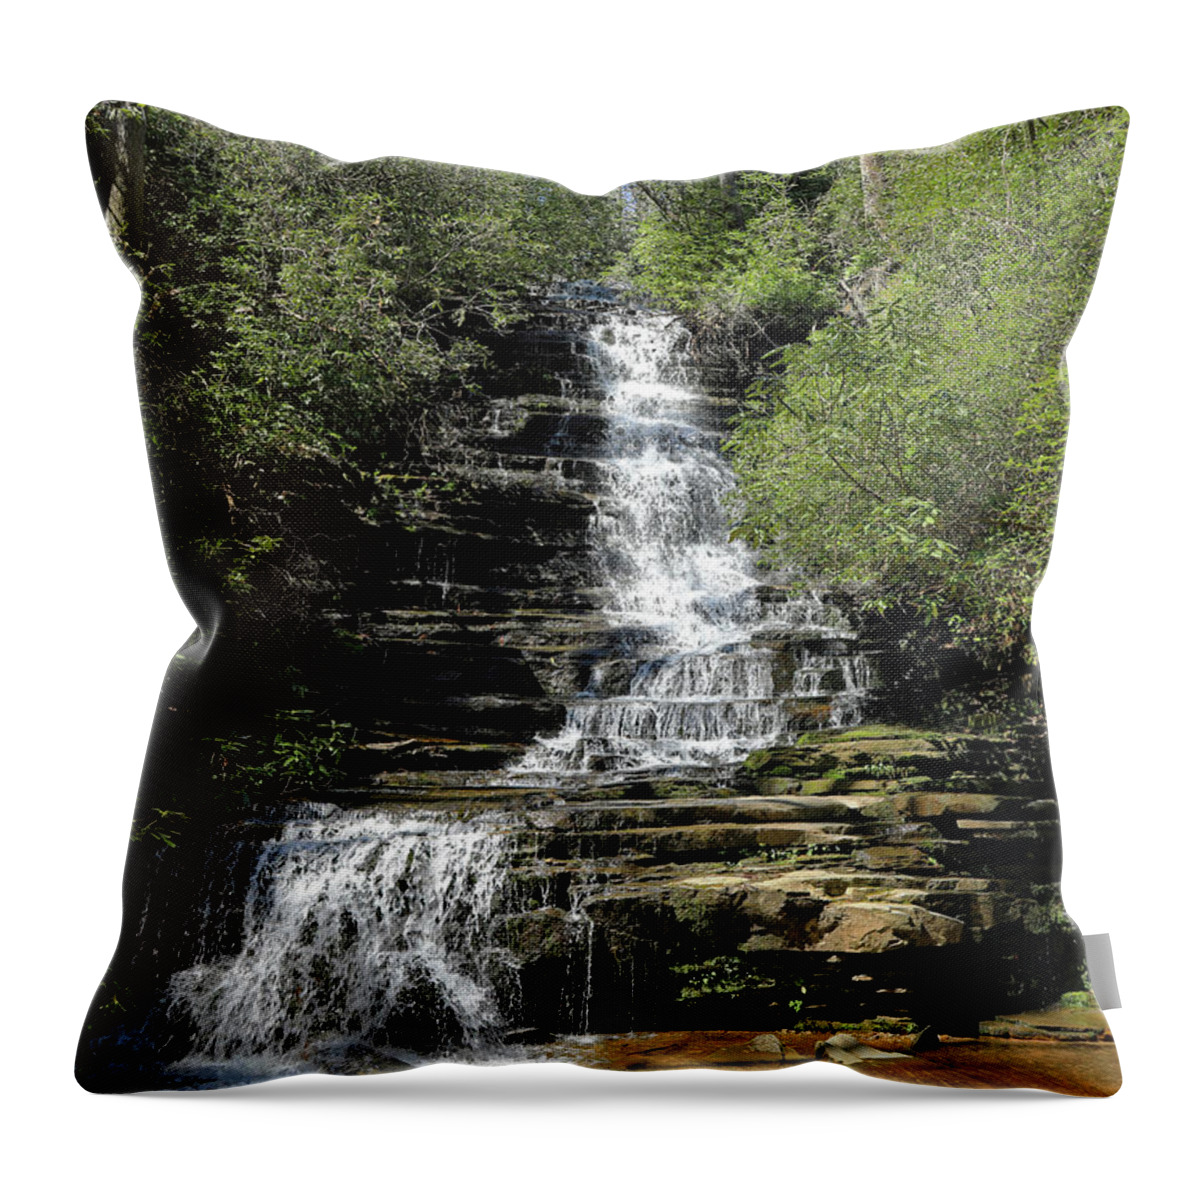 Waterfall Throw Pillow featuring the photograph Panther Falls - Georgia by Richard Krebs